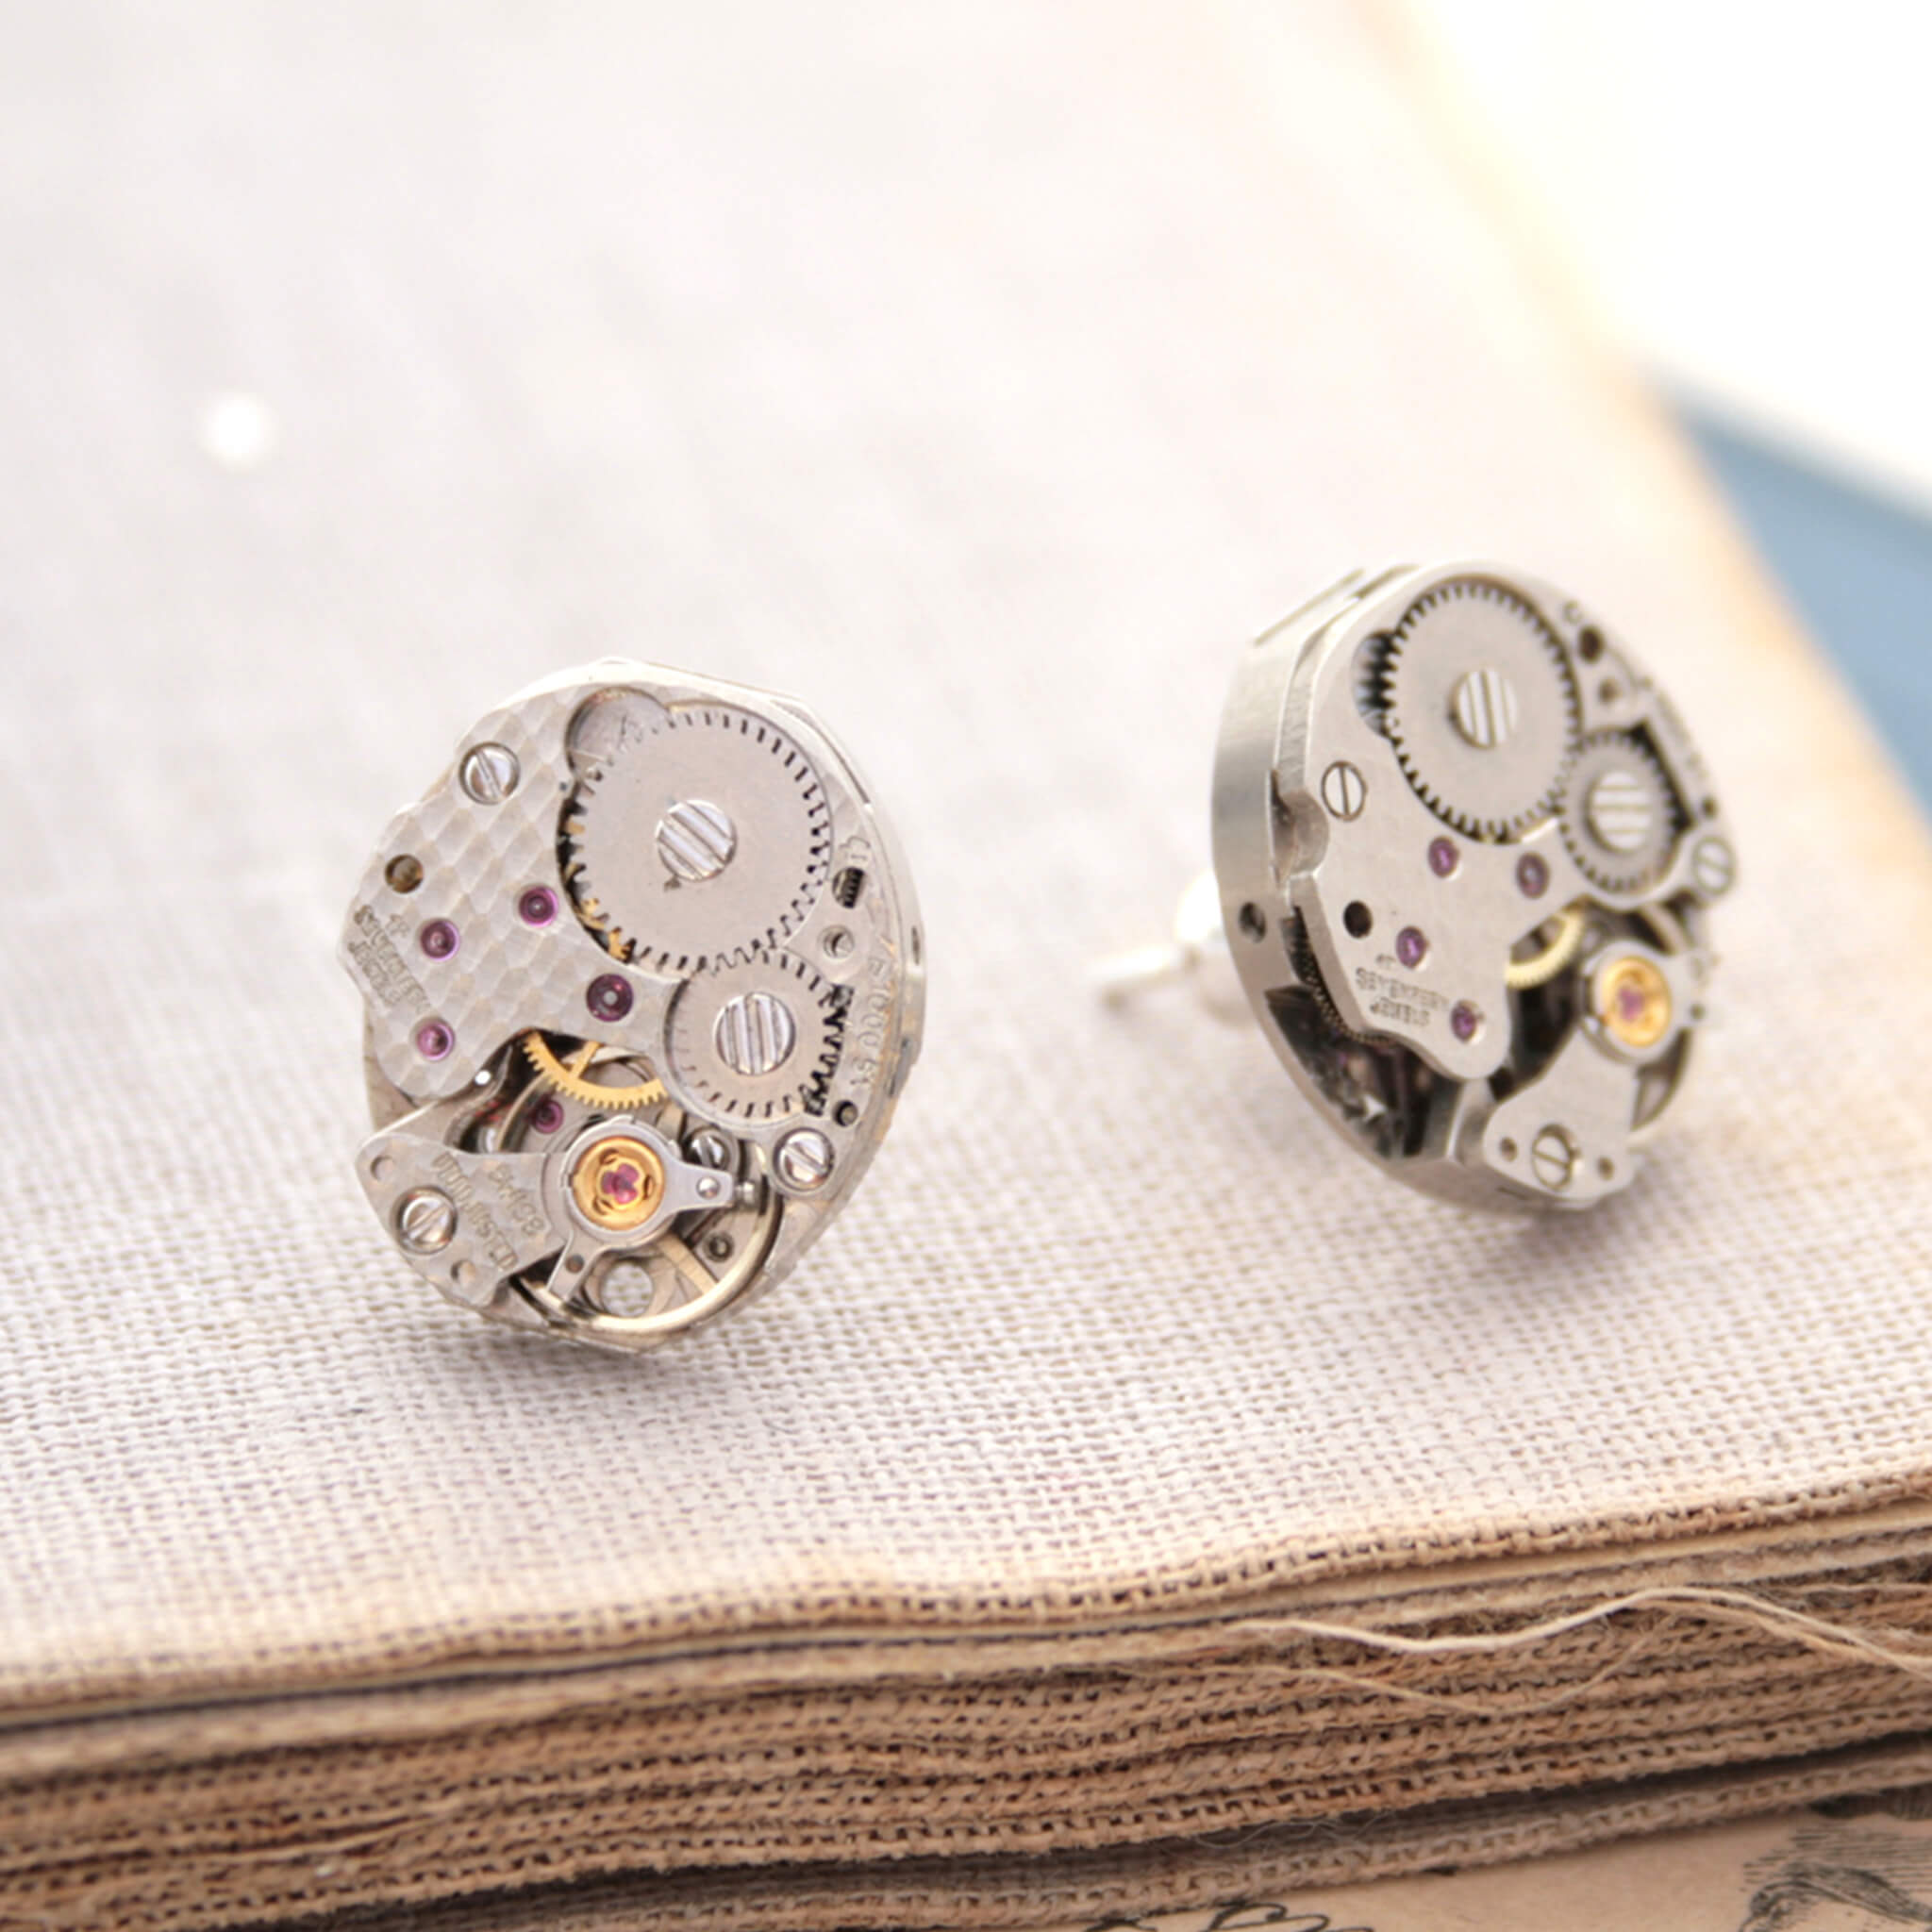 Watch movements turned into stud earrings lying on a vintage book